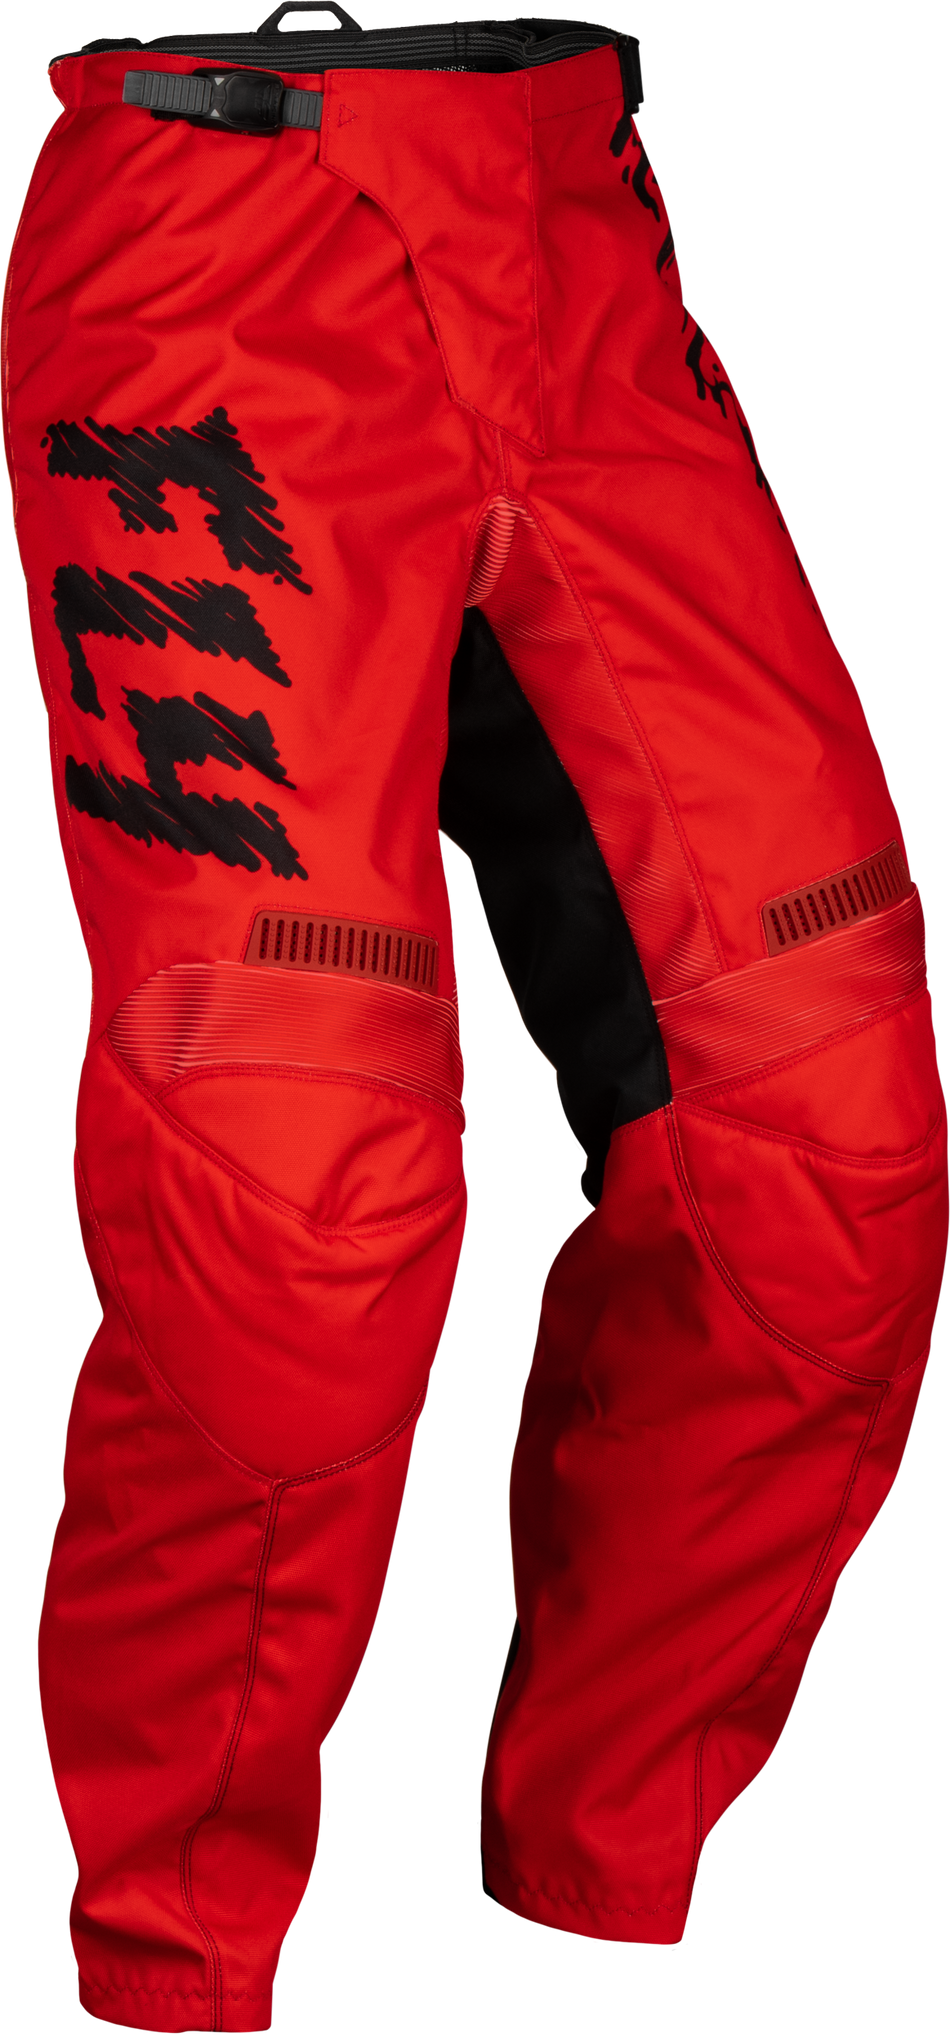 FLY RACING Youth F-16 Pants Red/Black/Grey Sz 24 377-23224